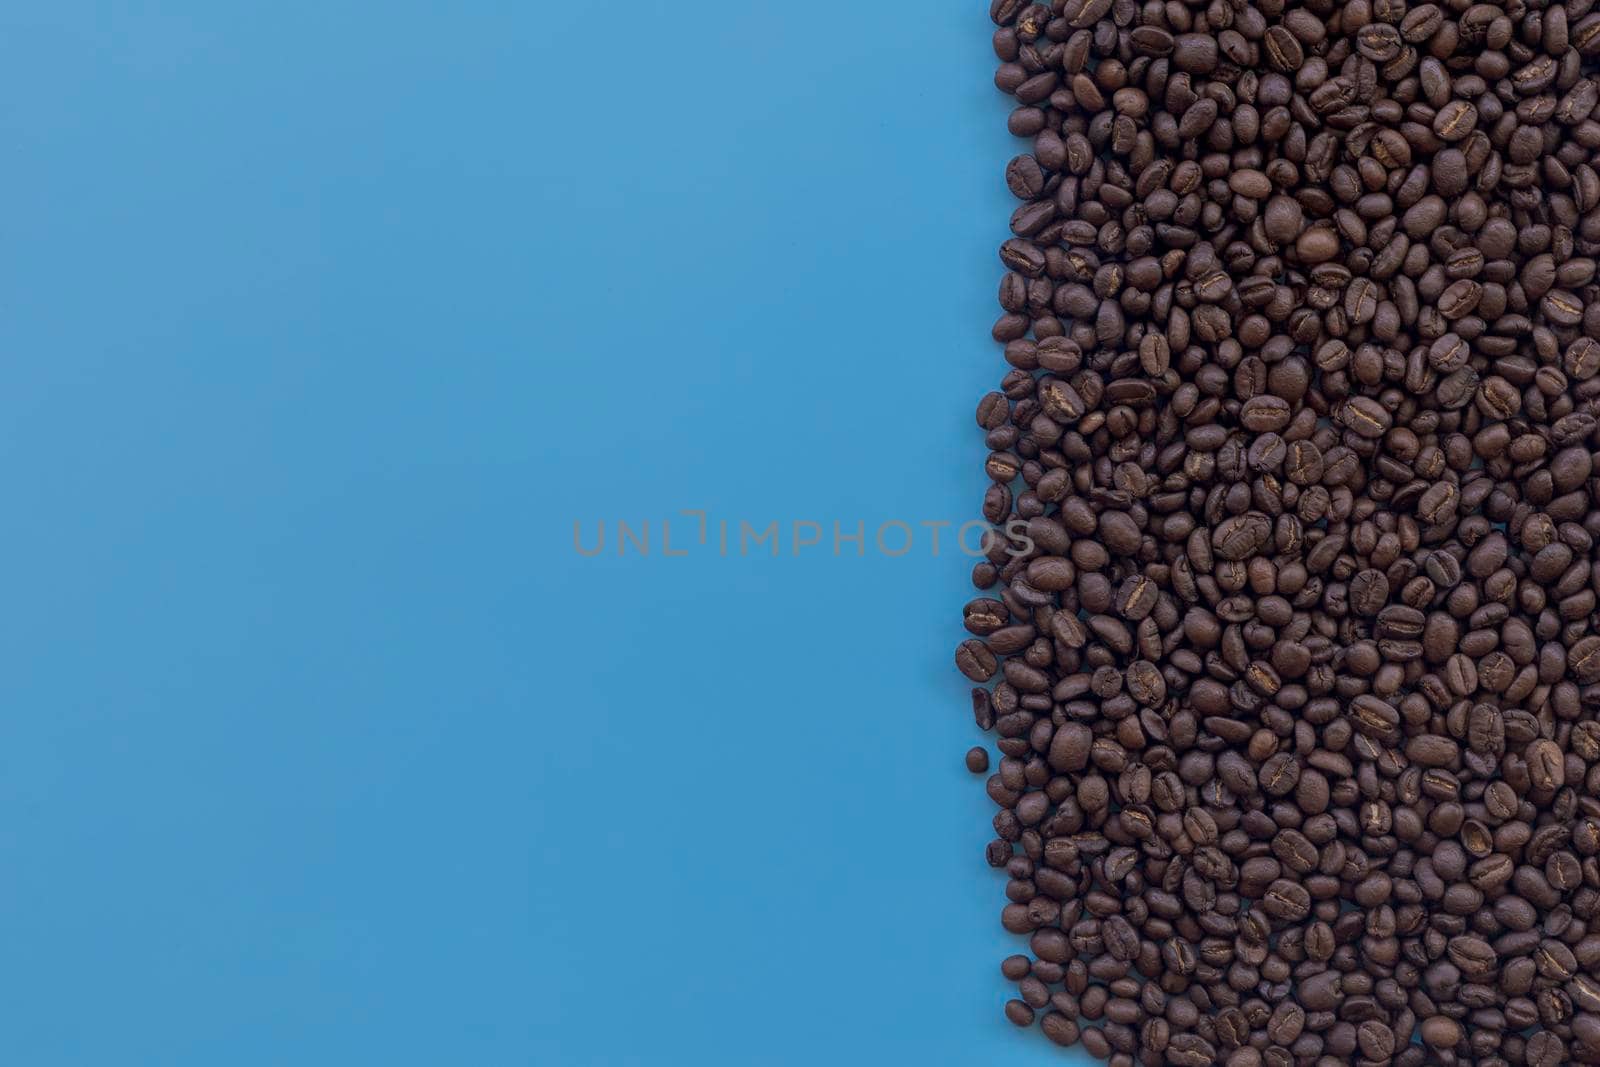 Top view brown roasted coffee beans scattered on blue background. Coffee beans on half of blue background with copy space